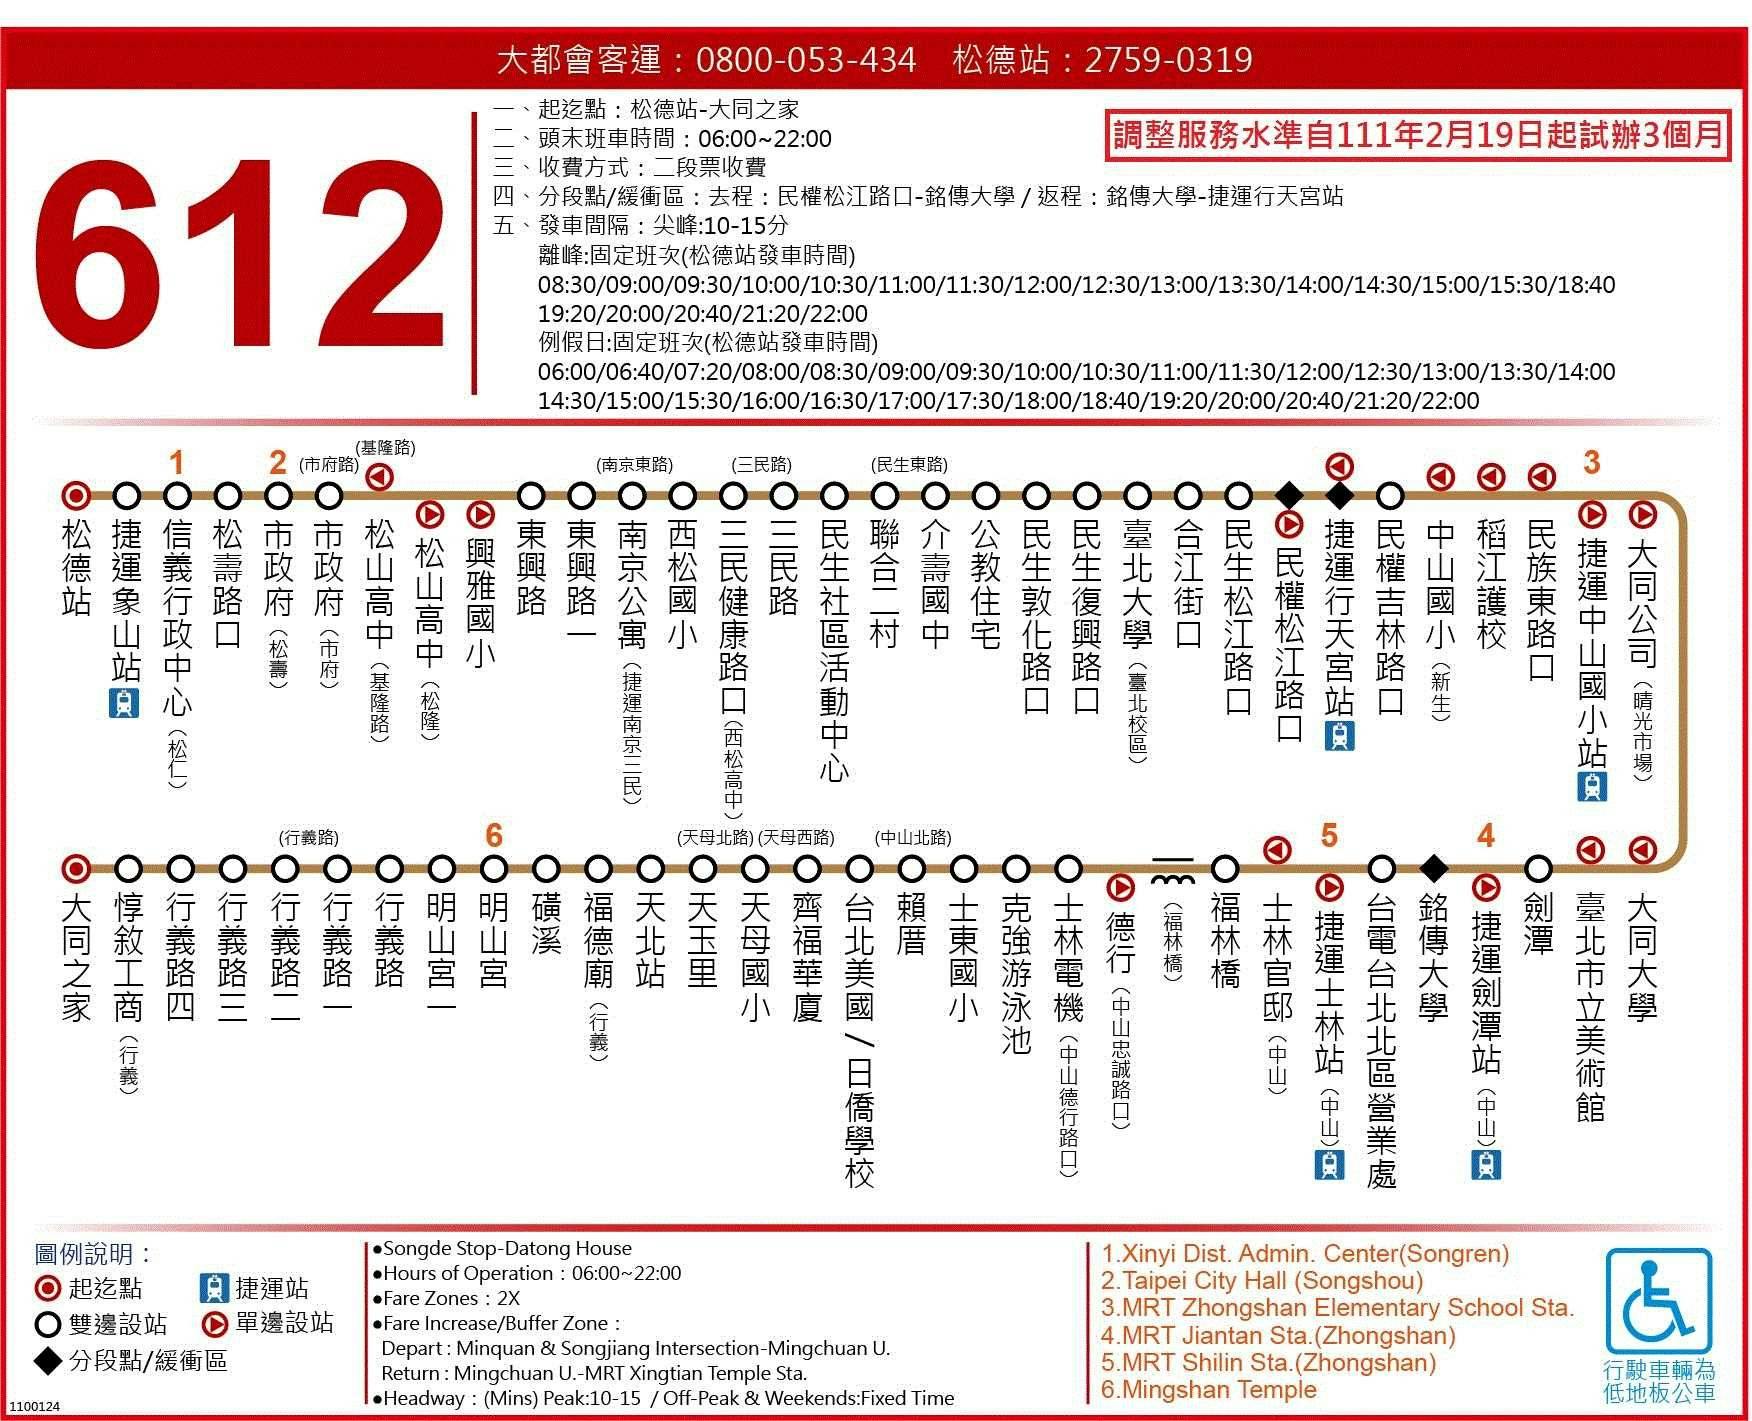 612Route Map-台北市 Bus